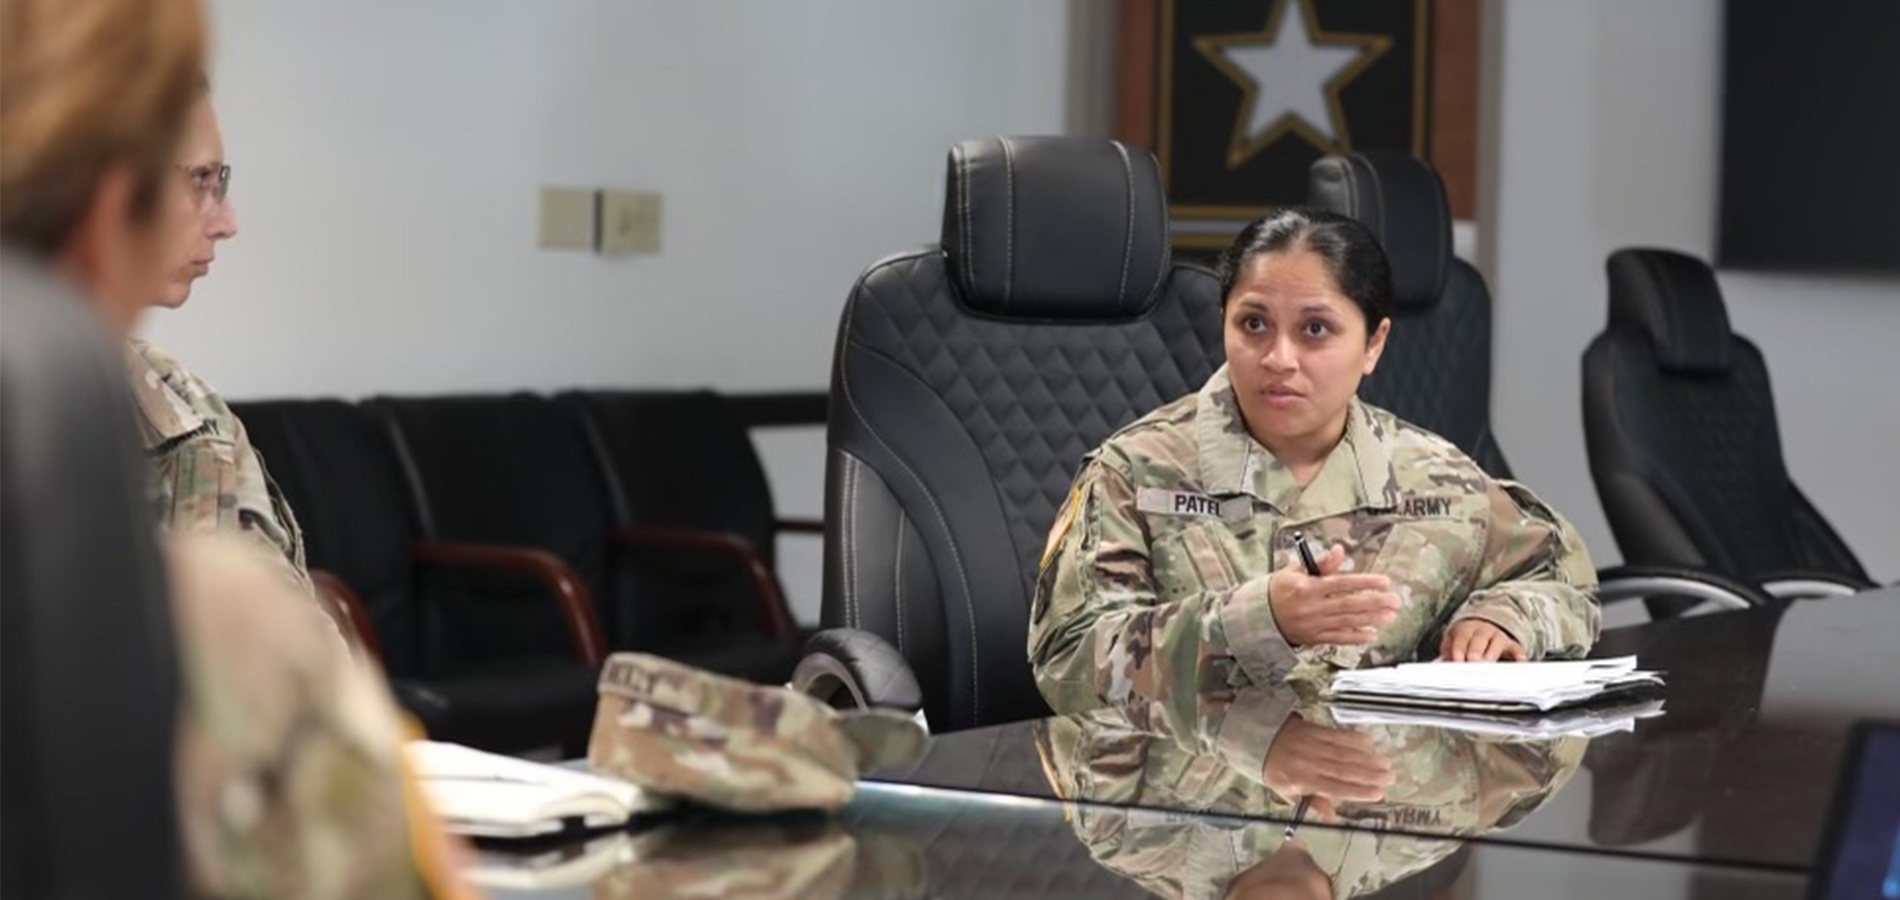 Tanvi Patel in camouflage Army attire sits in a conference room, with two other people.